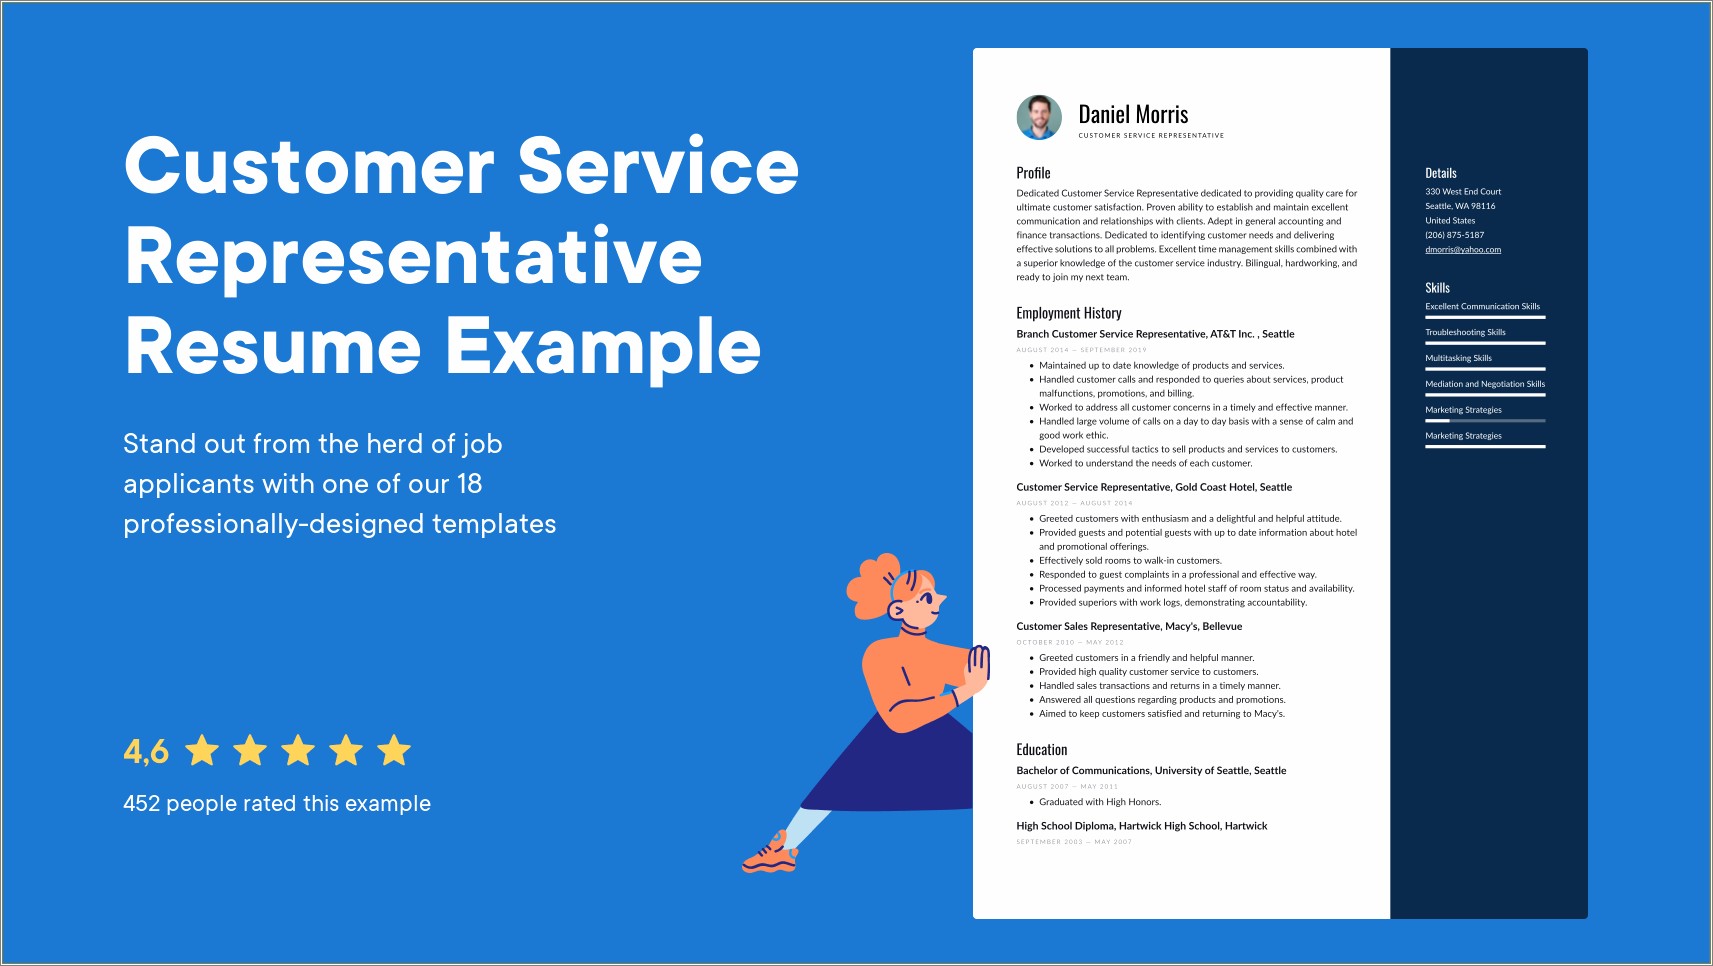 Resume Examples For Guest Service Agent